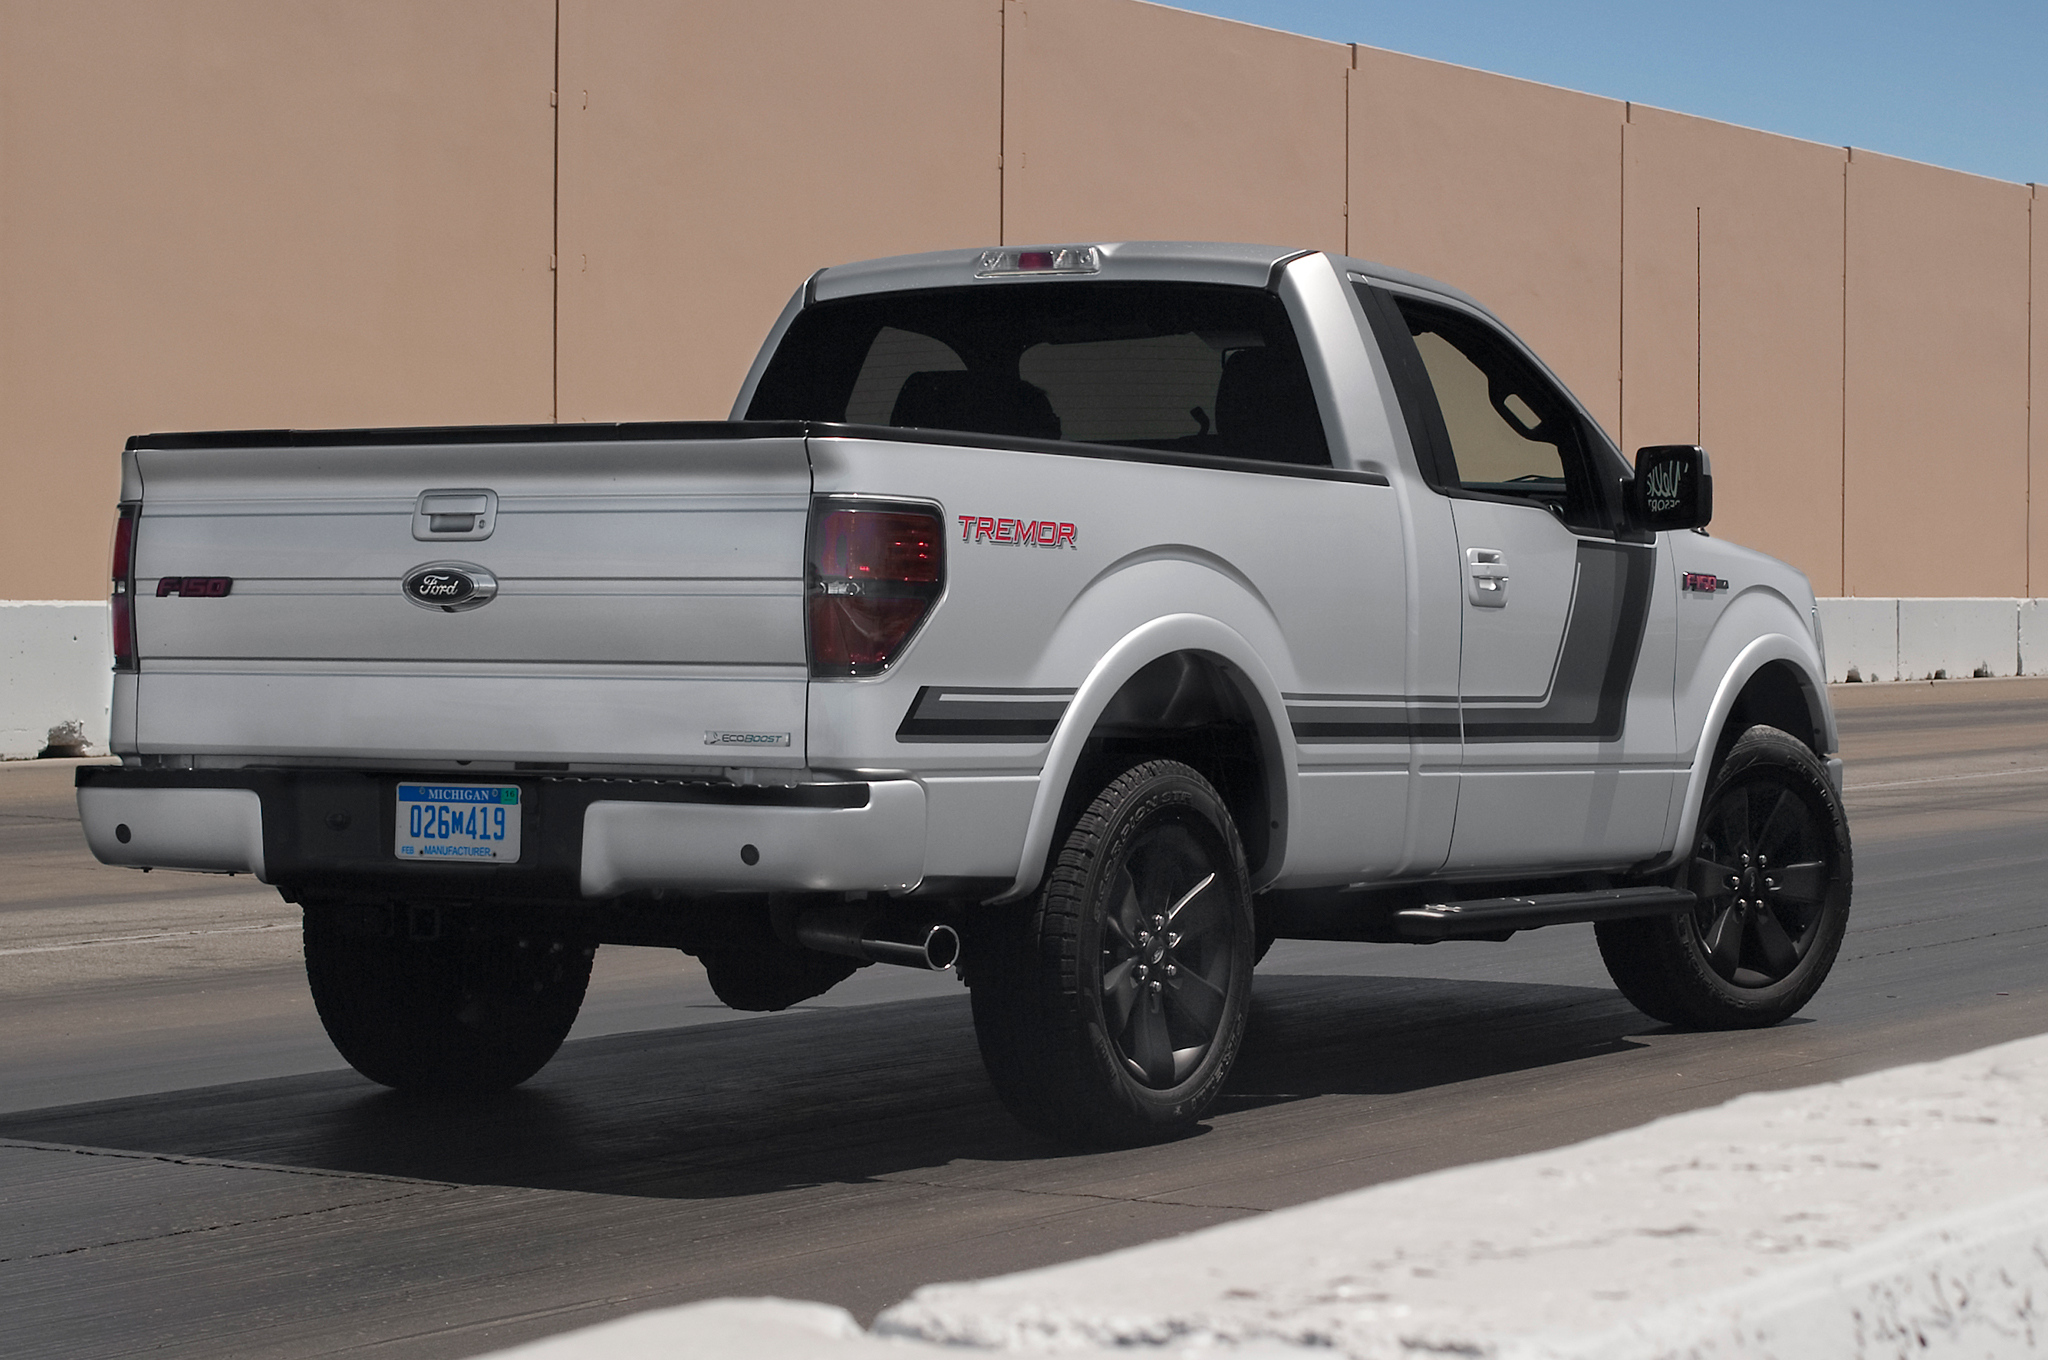 2014 Ford F-150 Tremor HD wallpapers, Desktop wallpaper - most viewed